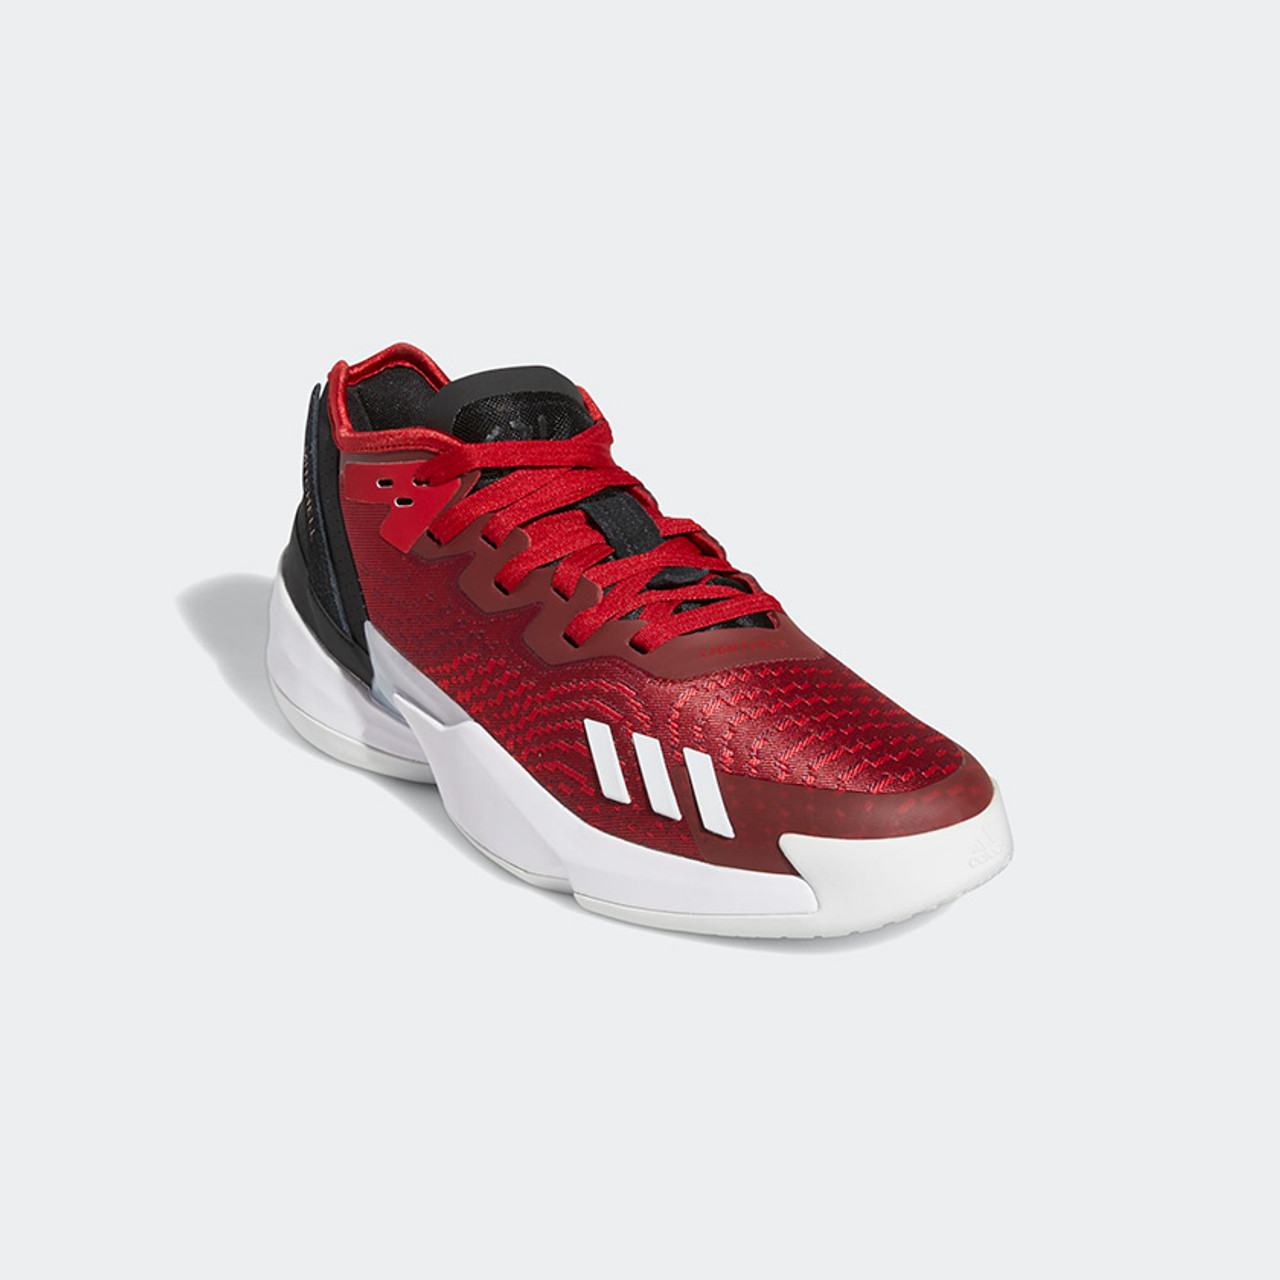 Adidas D.O.N. Issue #4 Shoes in Team Power Red Size 7.5 | Cavaliers